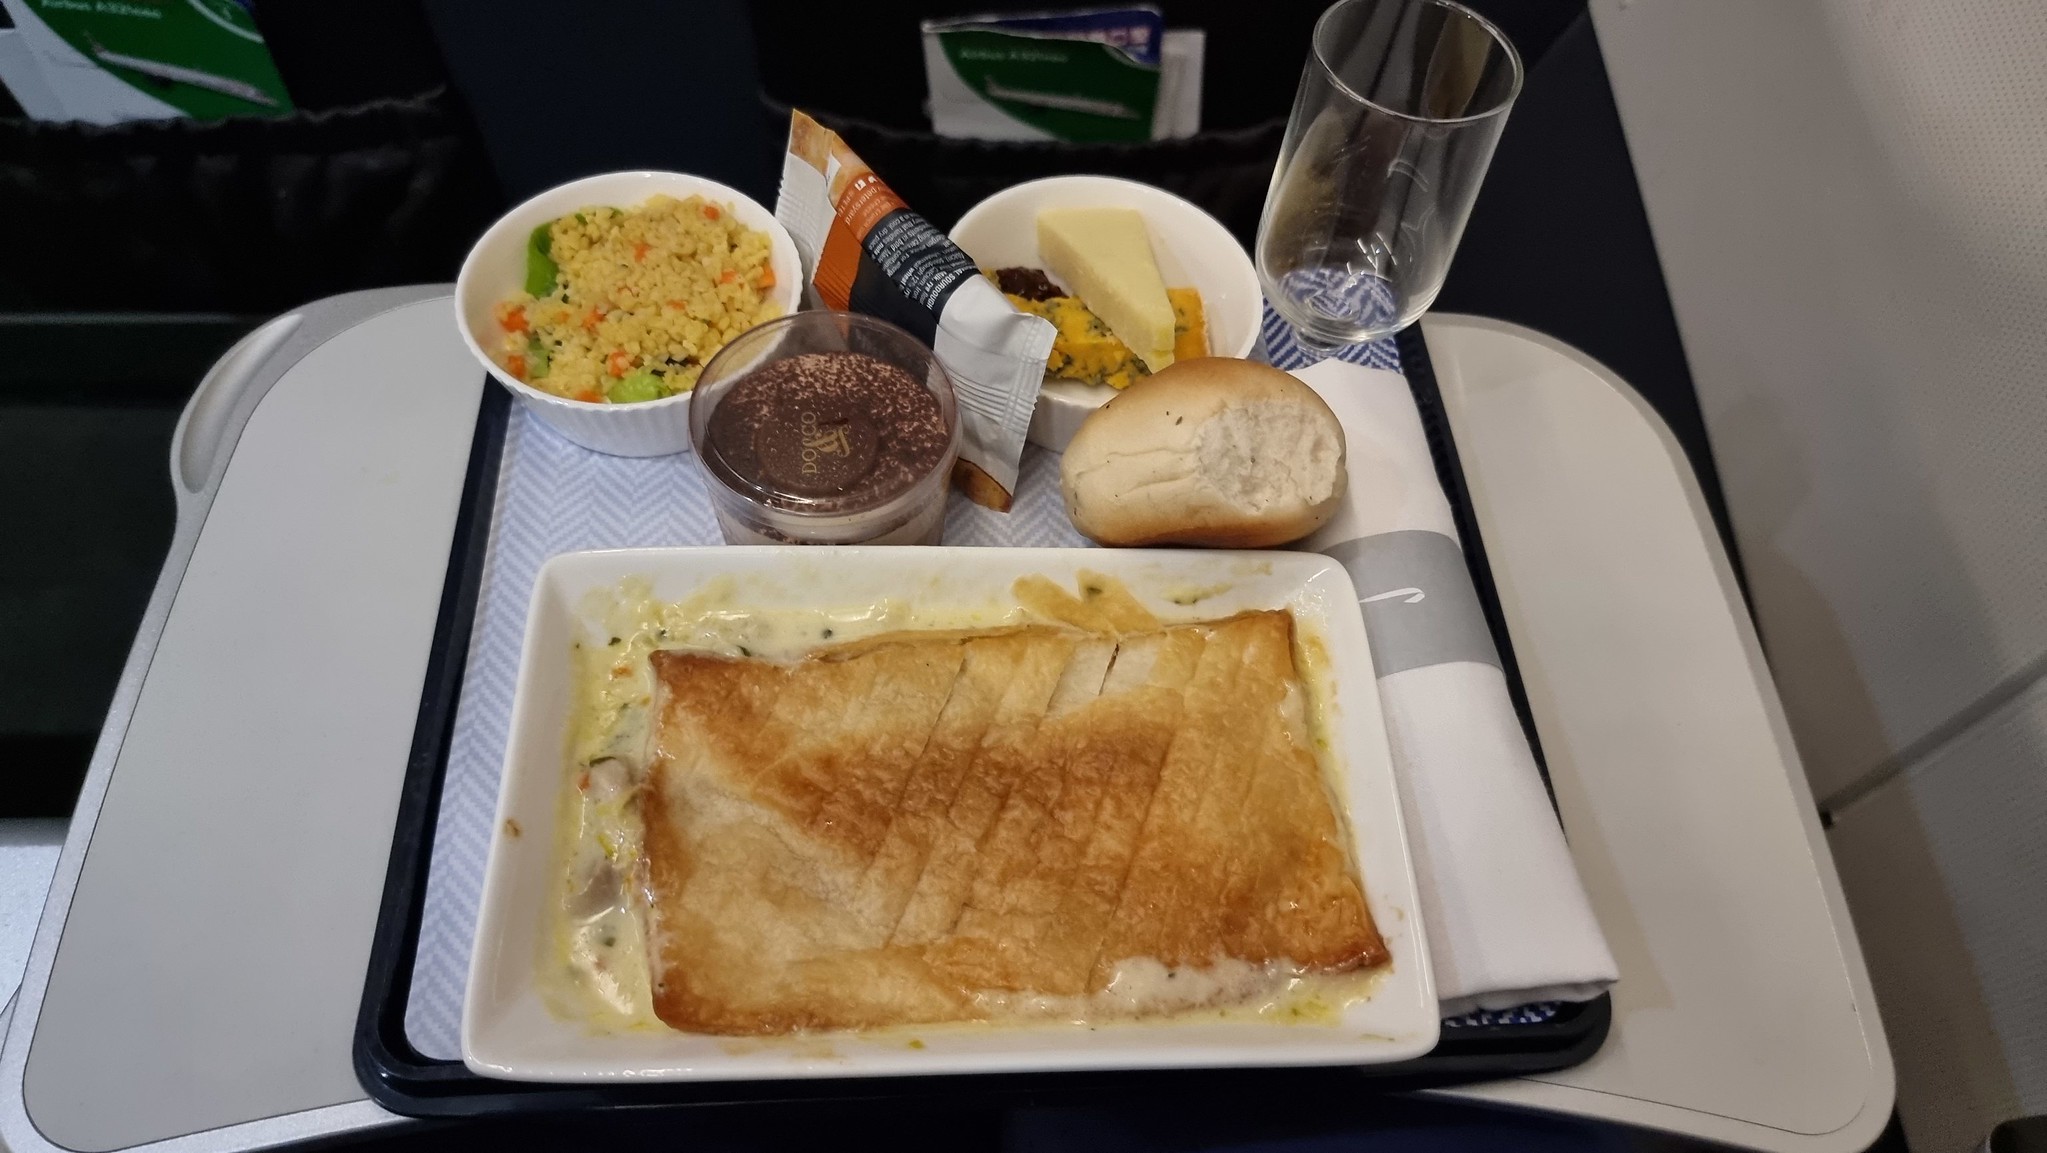 Another stupendous pie dinner on the BA flight to Budapest